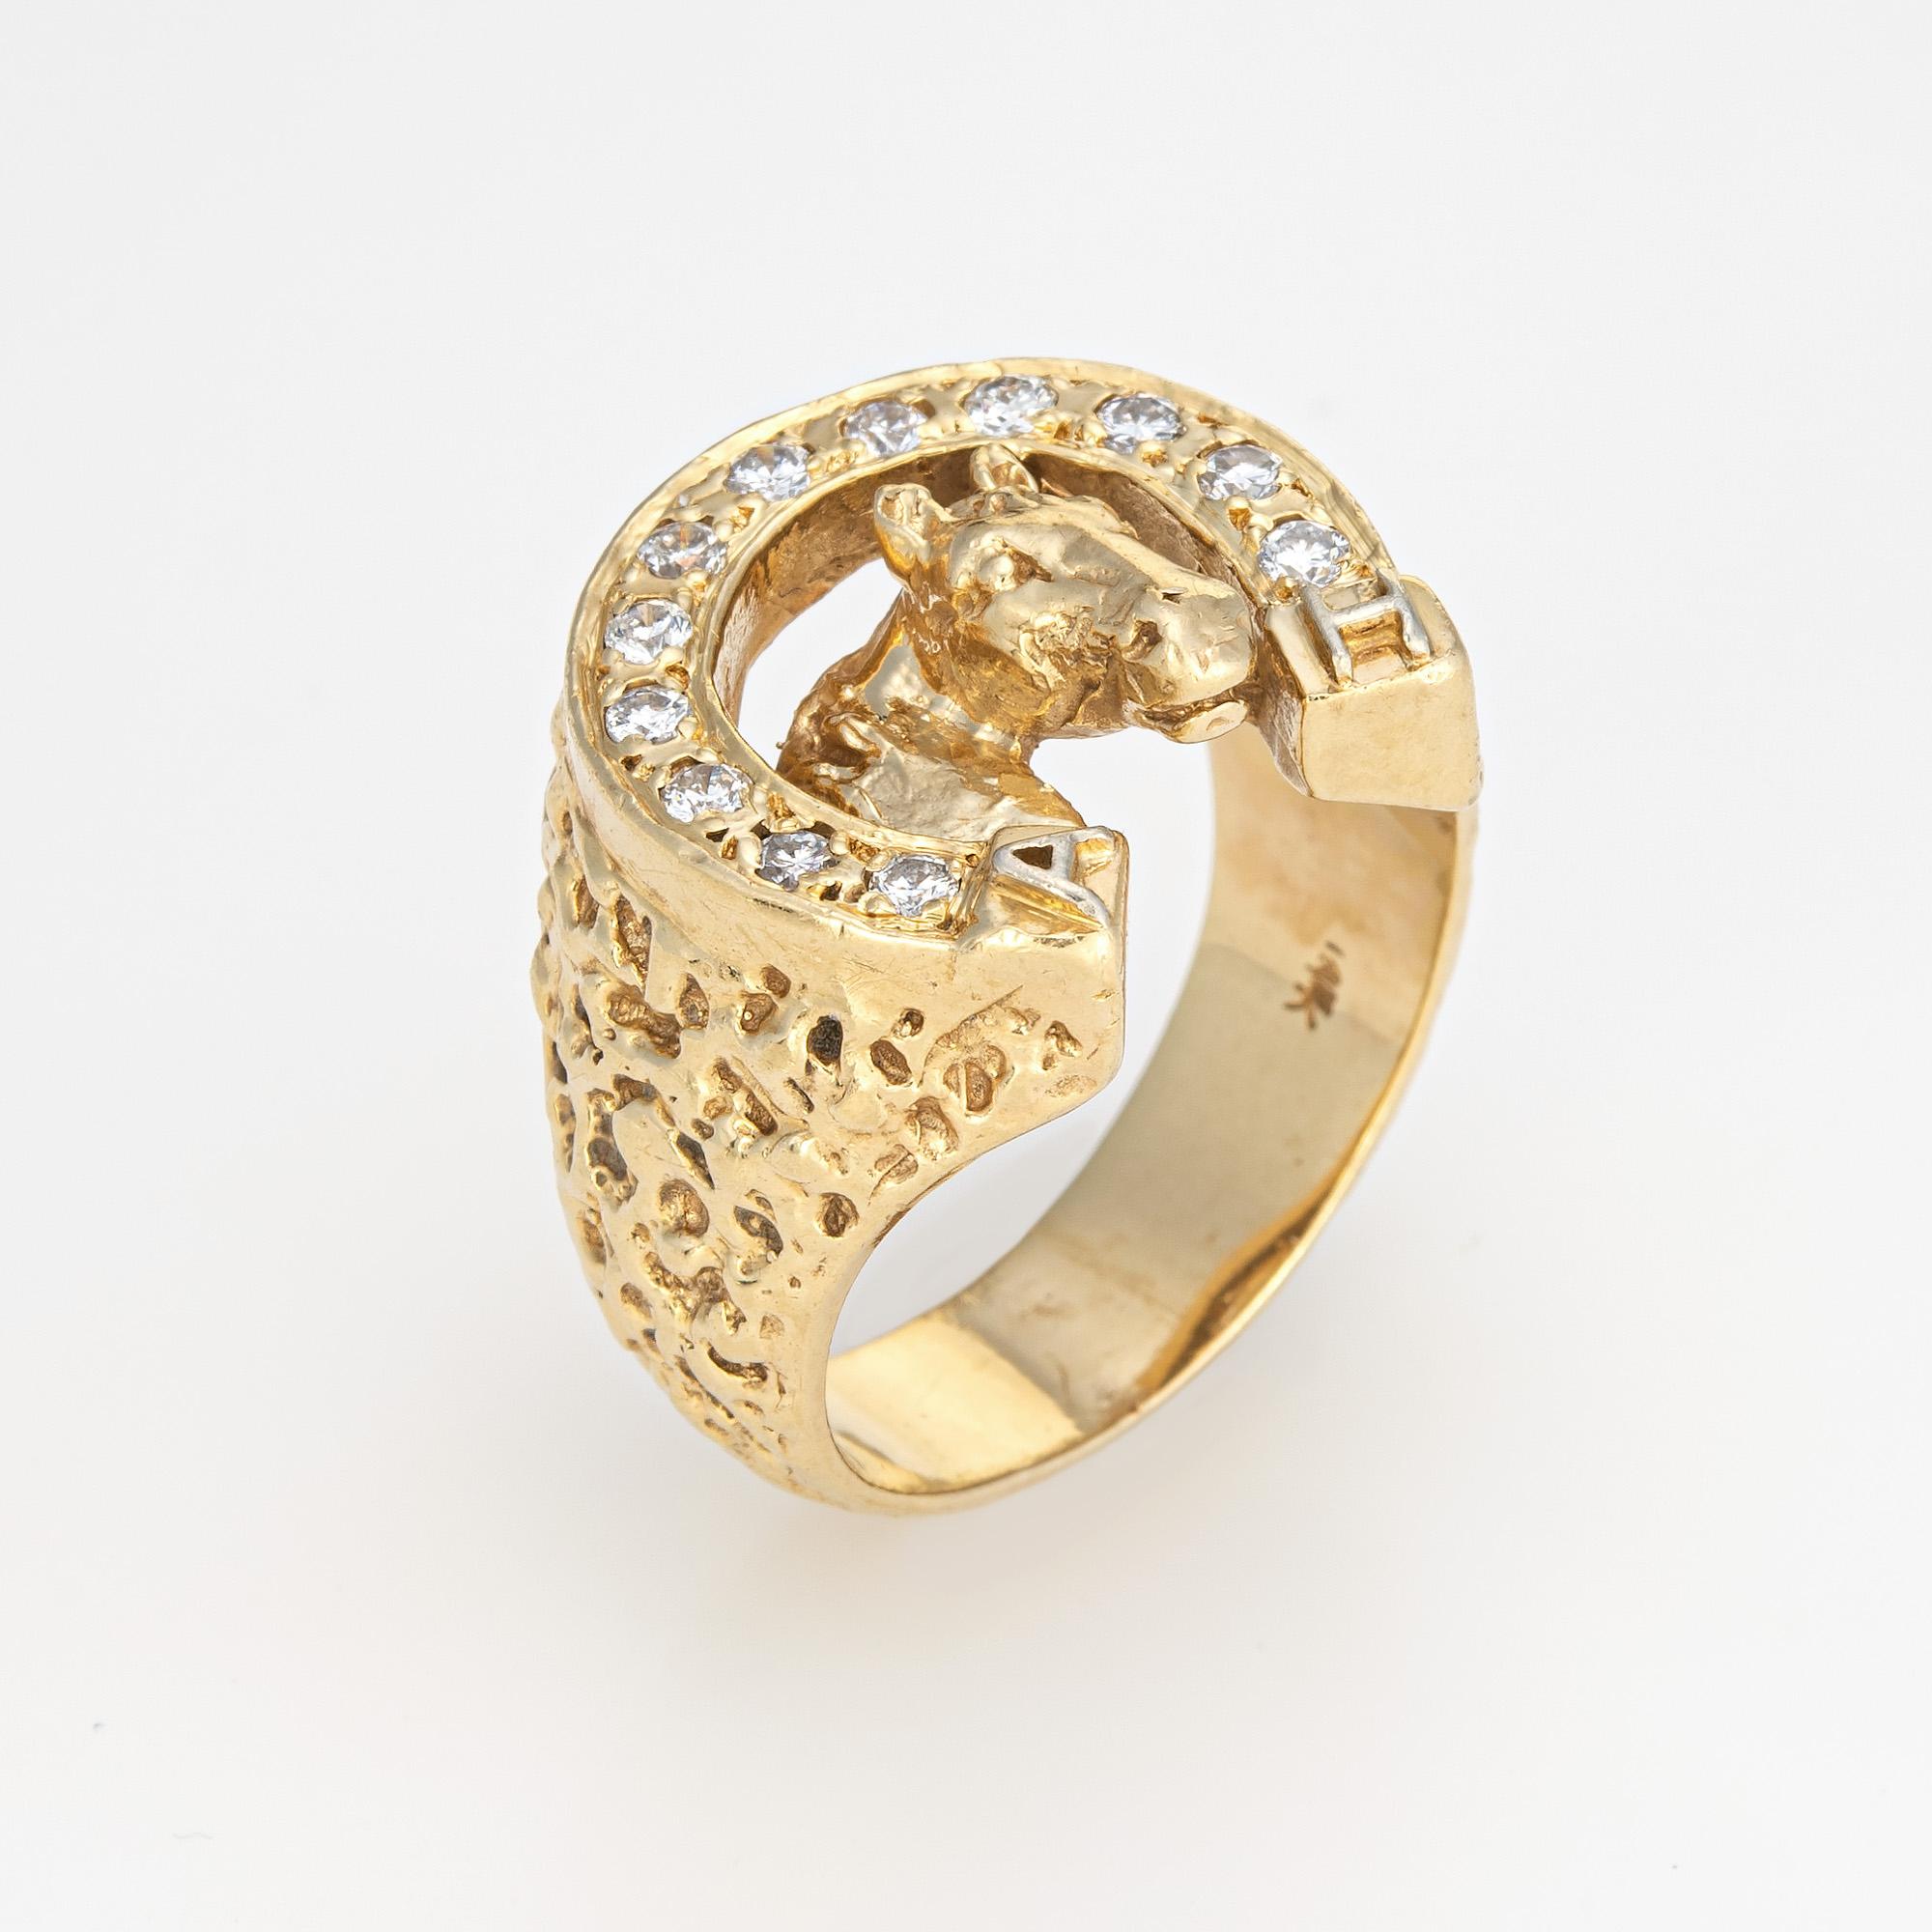 Stylish vintage diamond horseshoe ring (1970s) crafted in 14 karat yellow gold. 

12 diamonds total an estimated 0.24 carats (estimated at I-J color and SI1-I1 clarity). 

The charming horseshoe motif symbolizes good luck, with a horse head to the